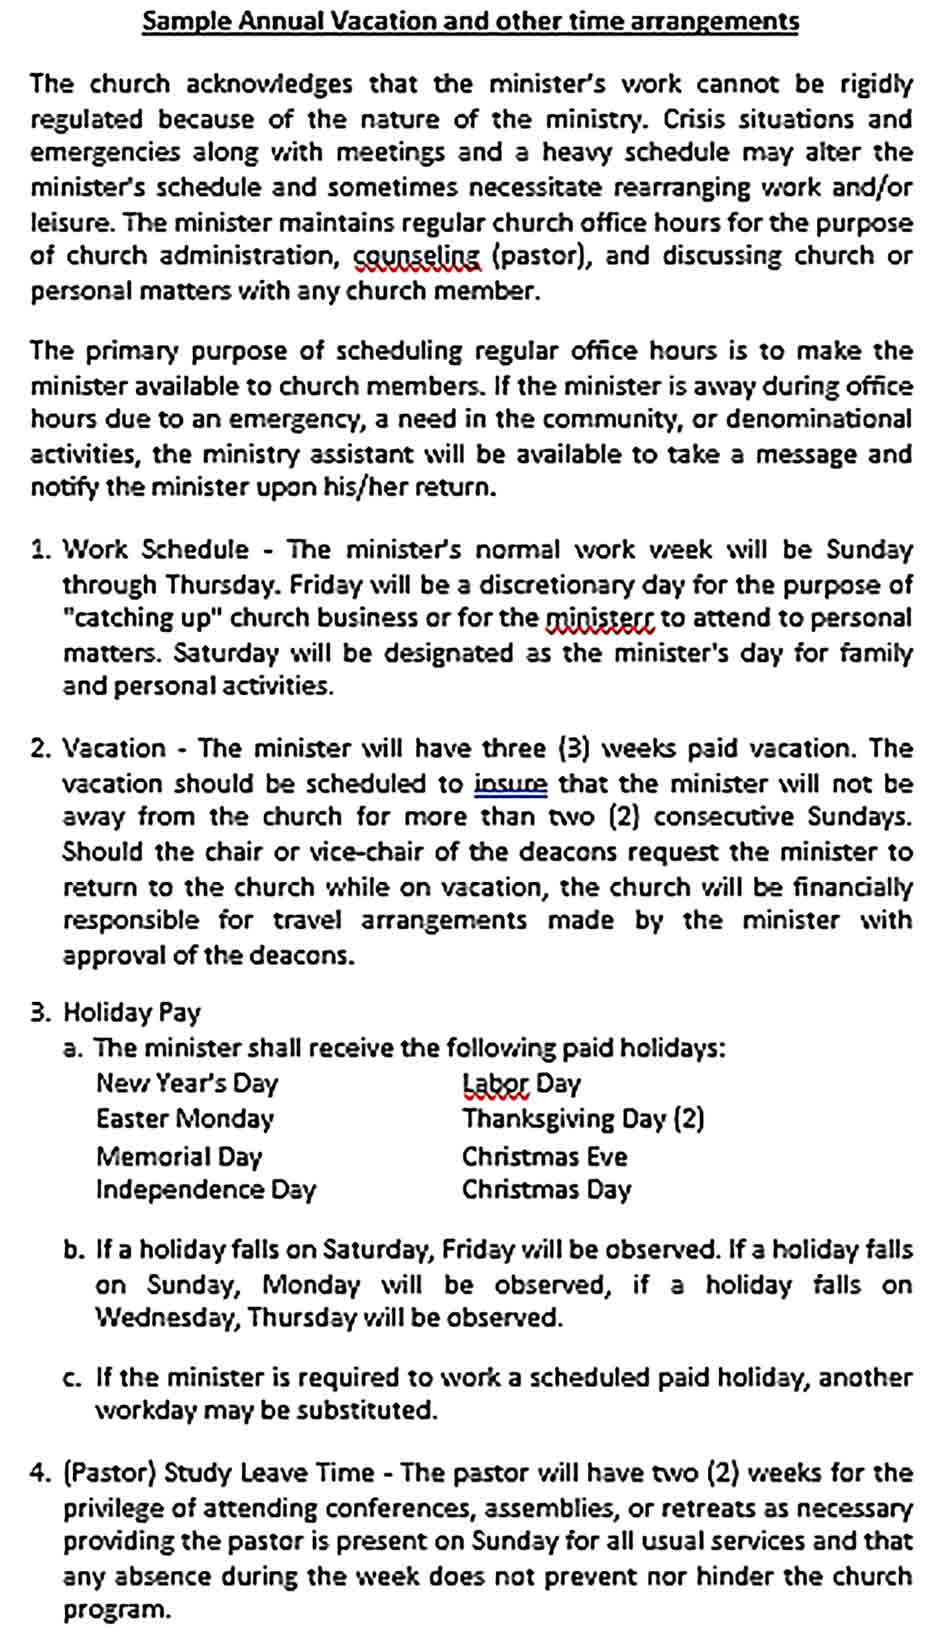 Sample Pastor Compensation and Vacation Guidelines